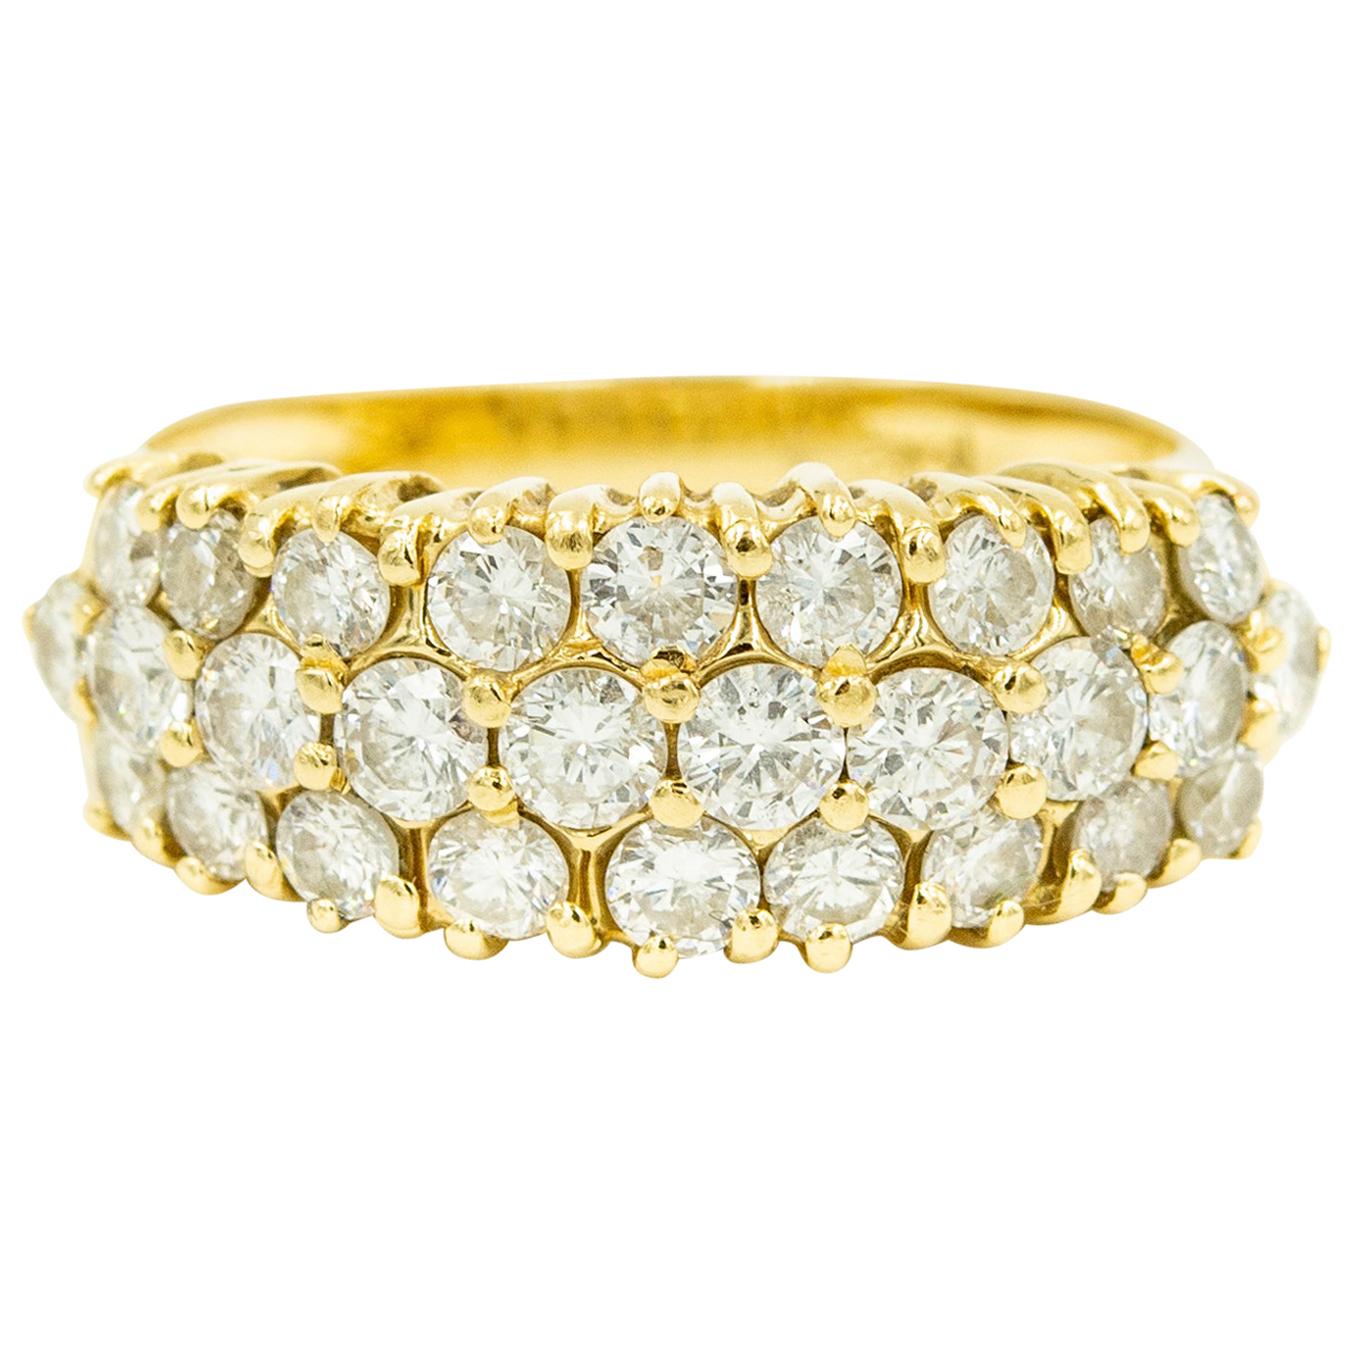 Triple Row Diamond Yellow Gold Band Ring with Three Rows of Diamonds in Front